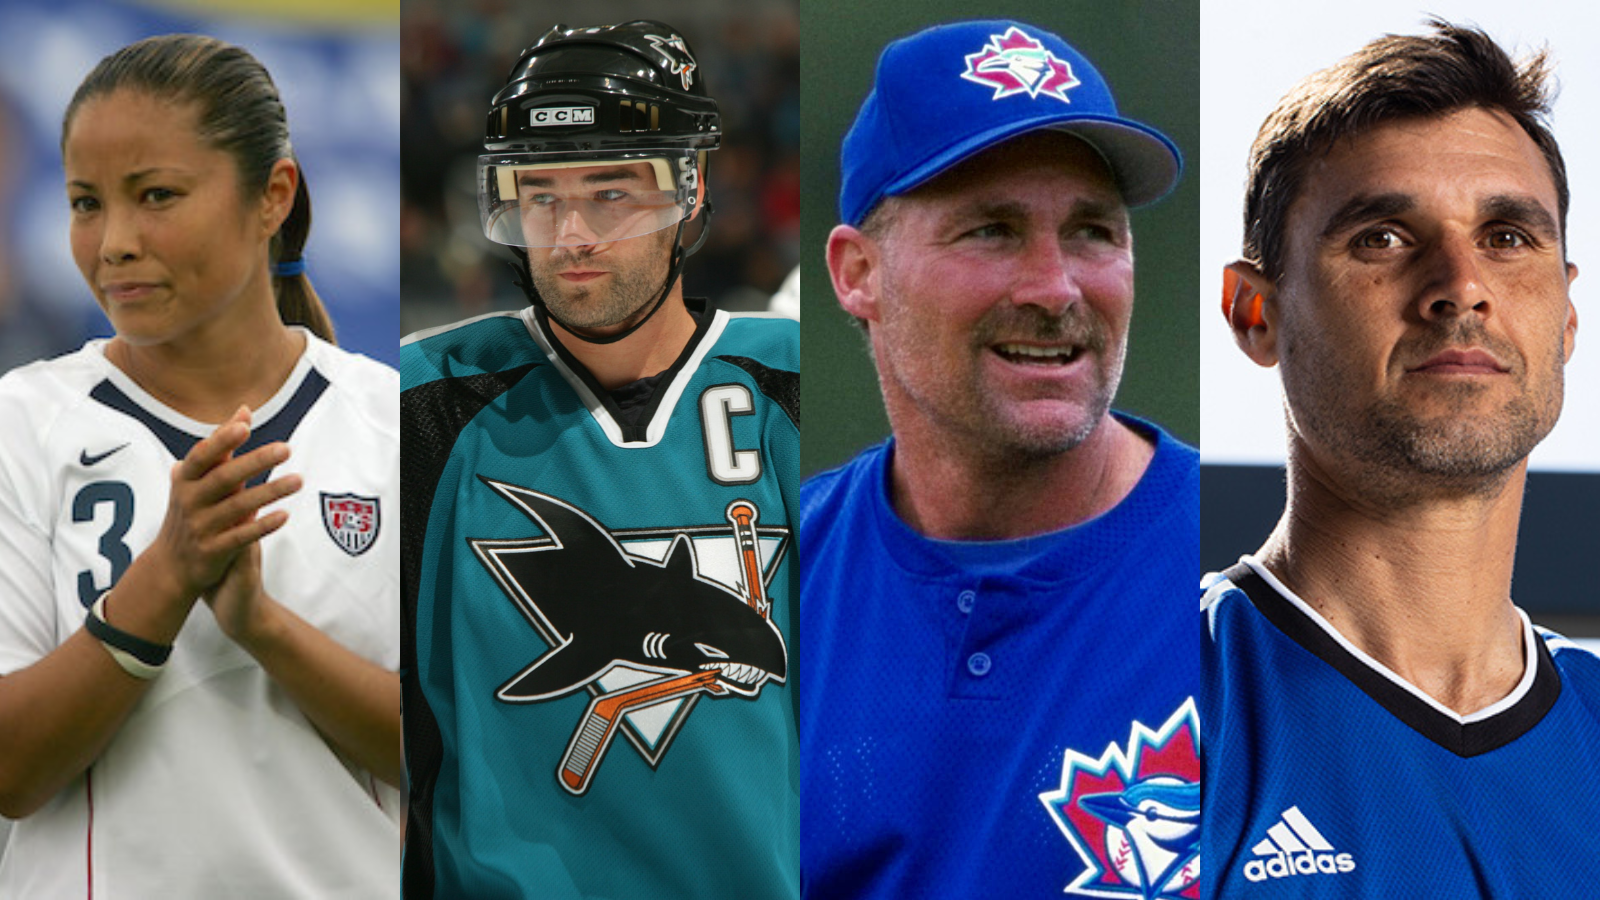 JUST ANNOUNCED! The San Jose Sports Hall of Fame Class of 2023